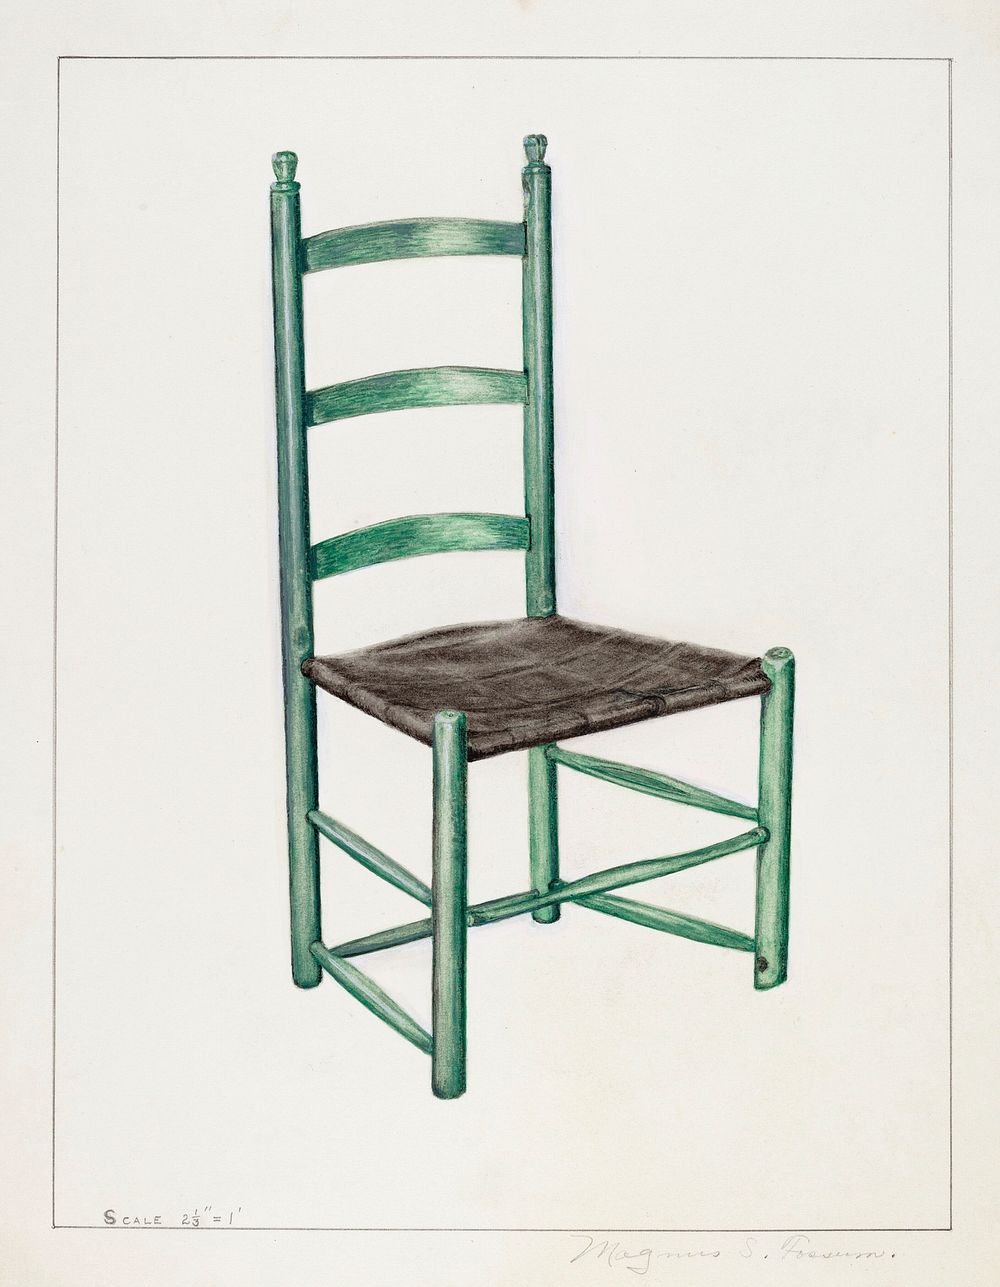 "Ladder Back" Chair - Called "Jolting Chair" (c. 1936) by Magnus S. Fossum. Original from The National Gallery of Art.…